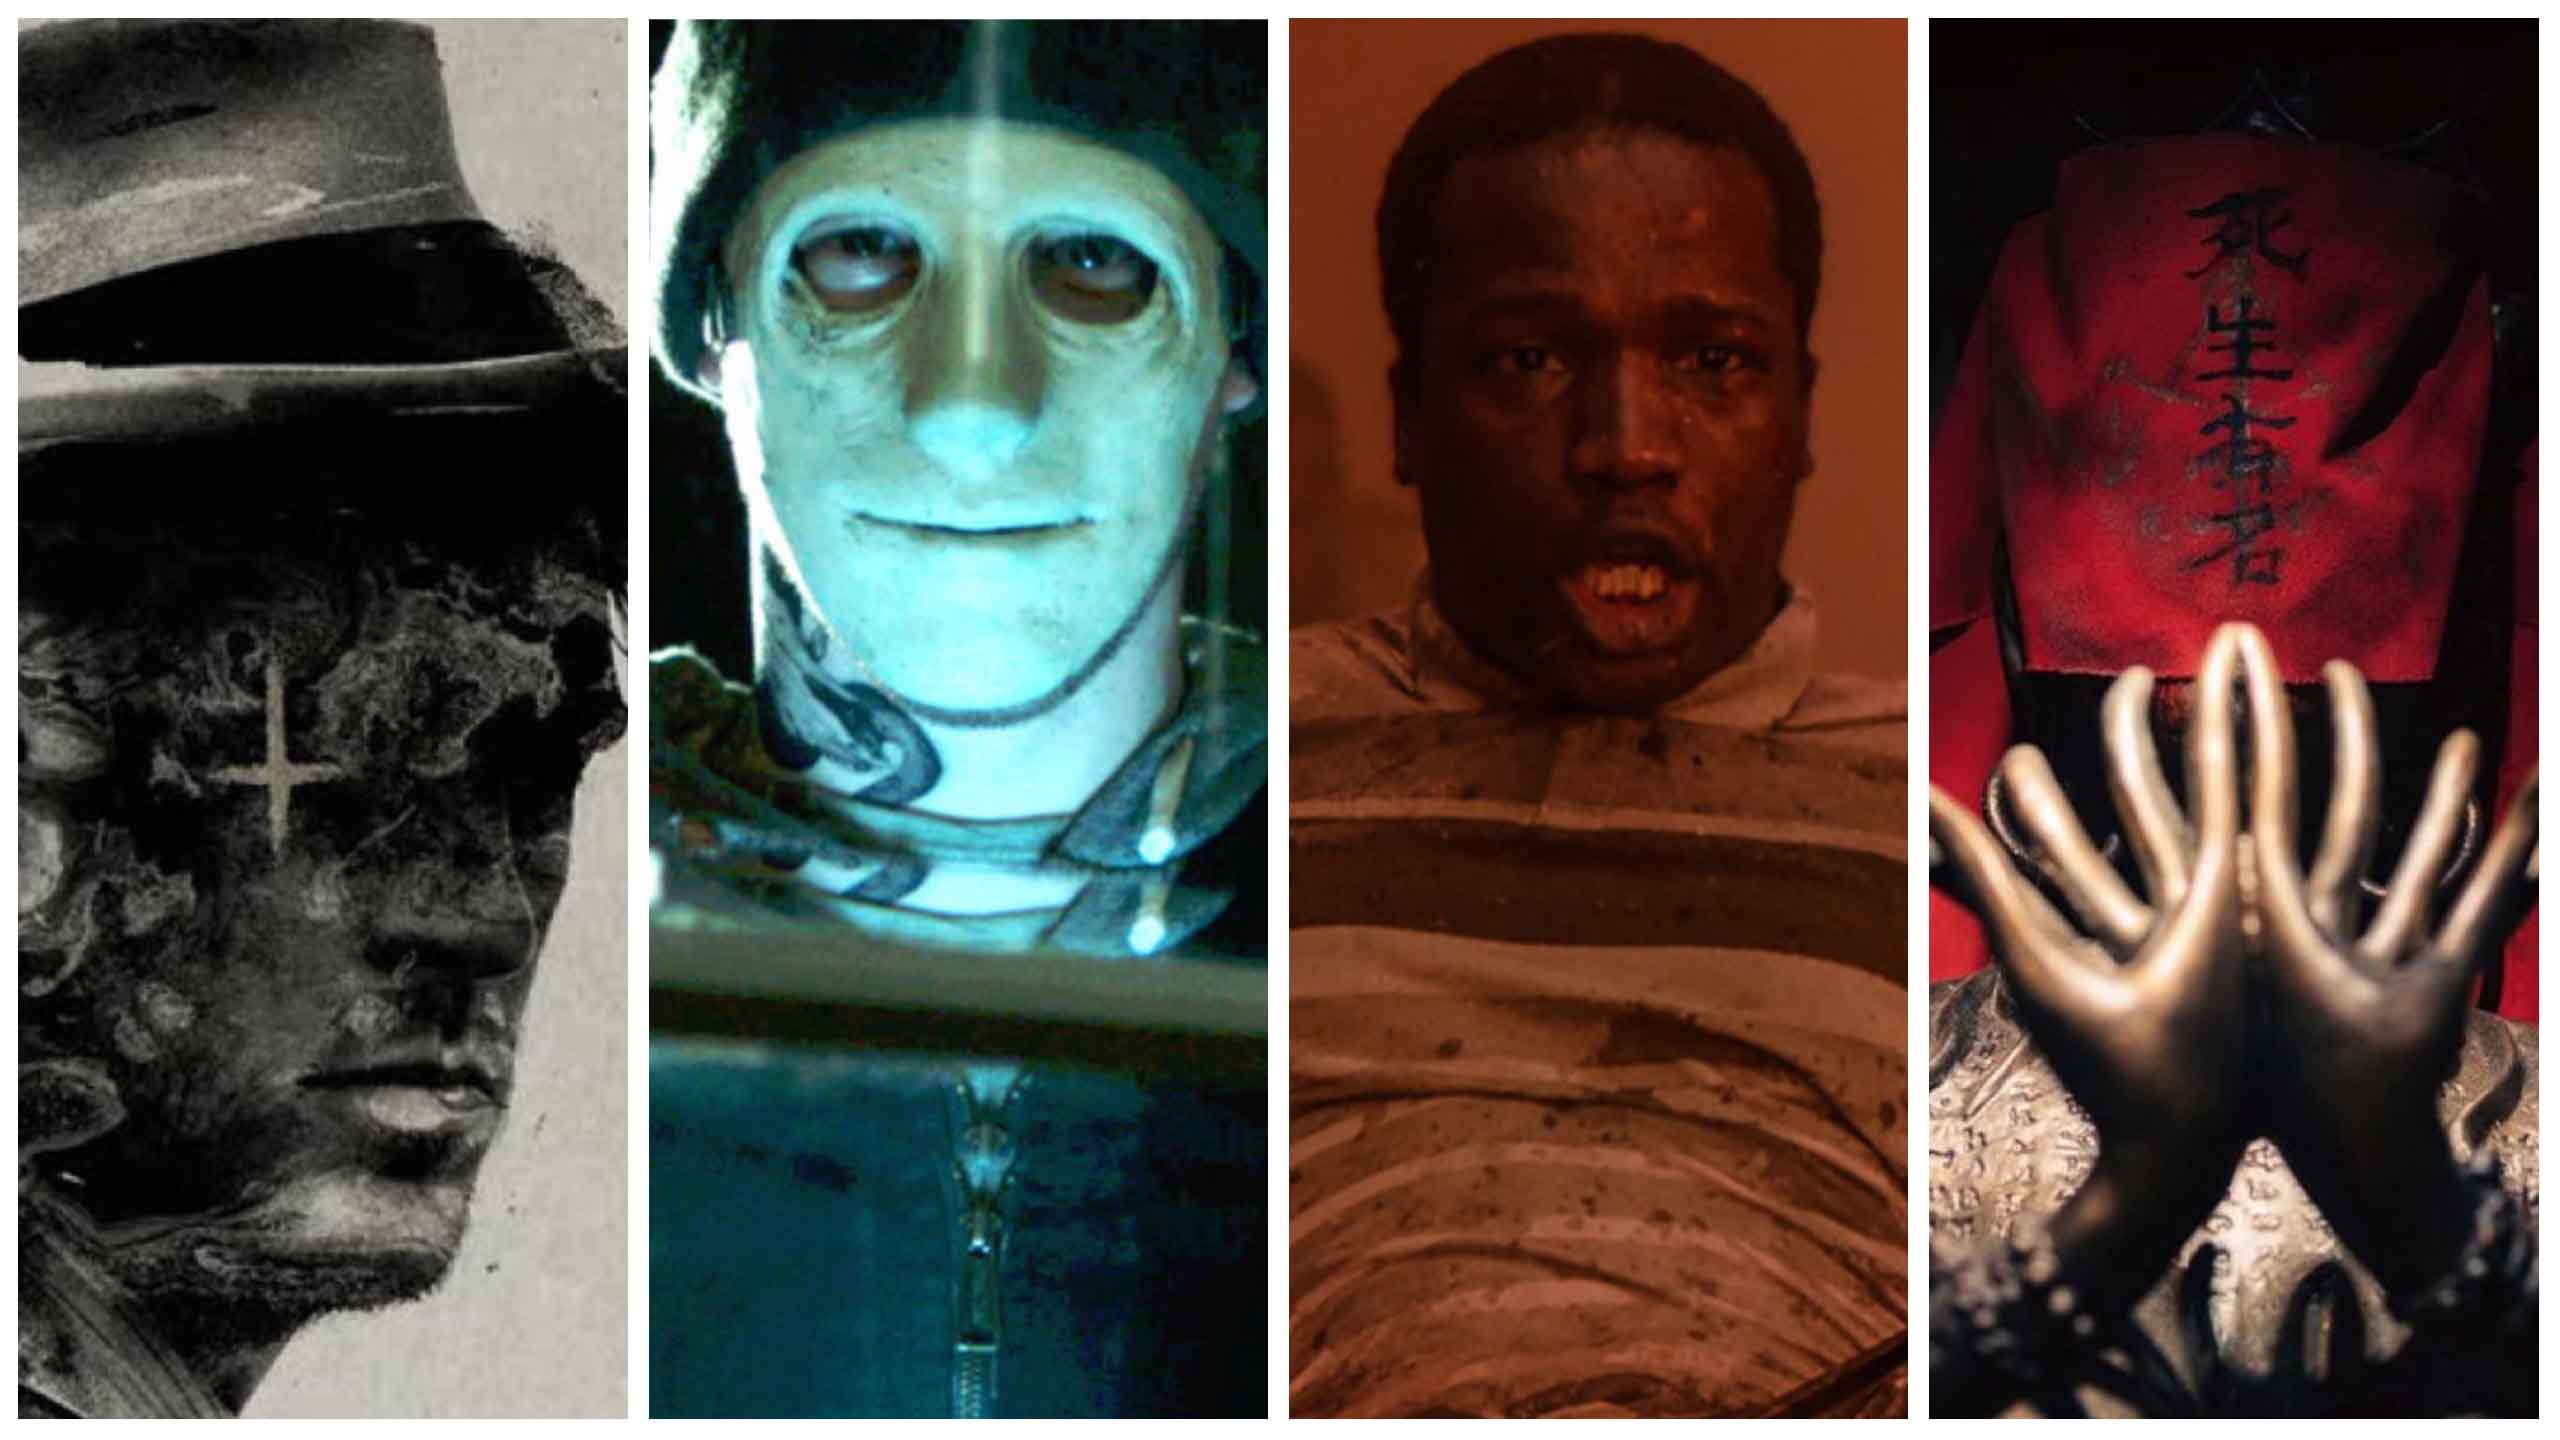 The best horror movies on Netflix - the scariest Netflix films, revealed